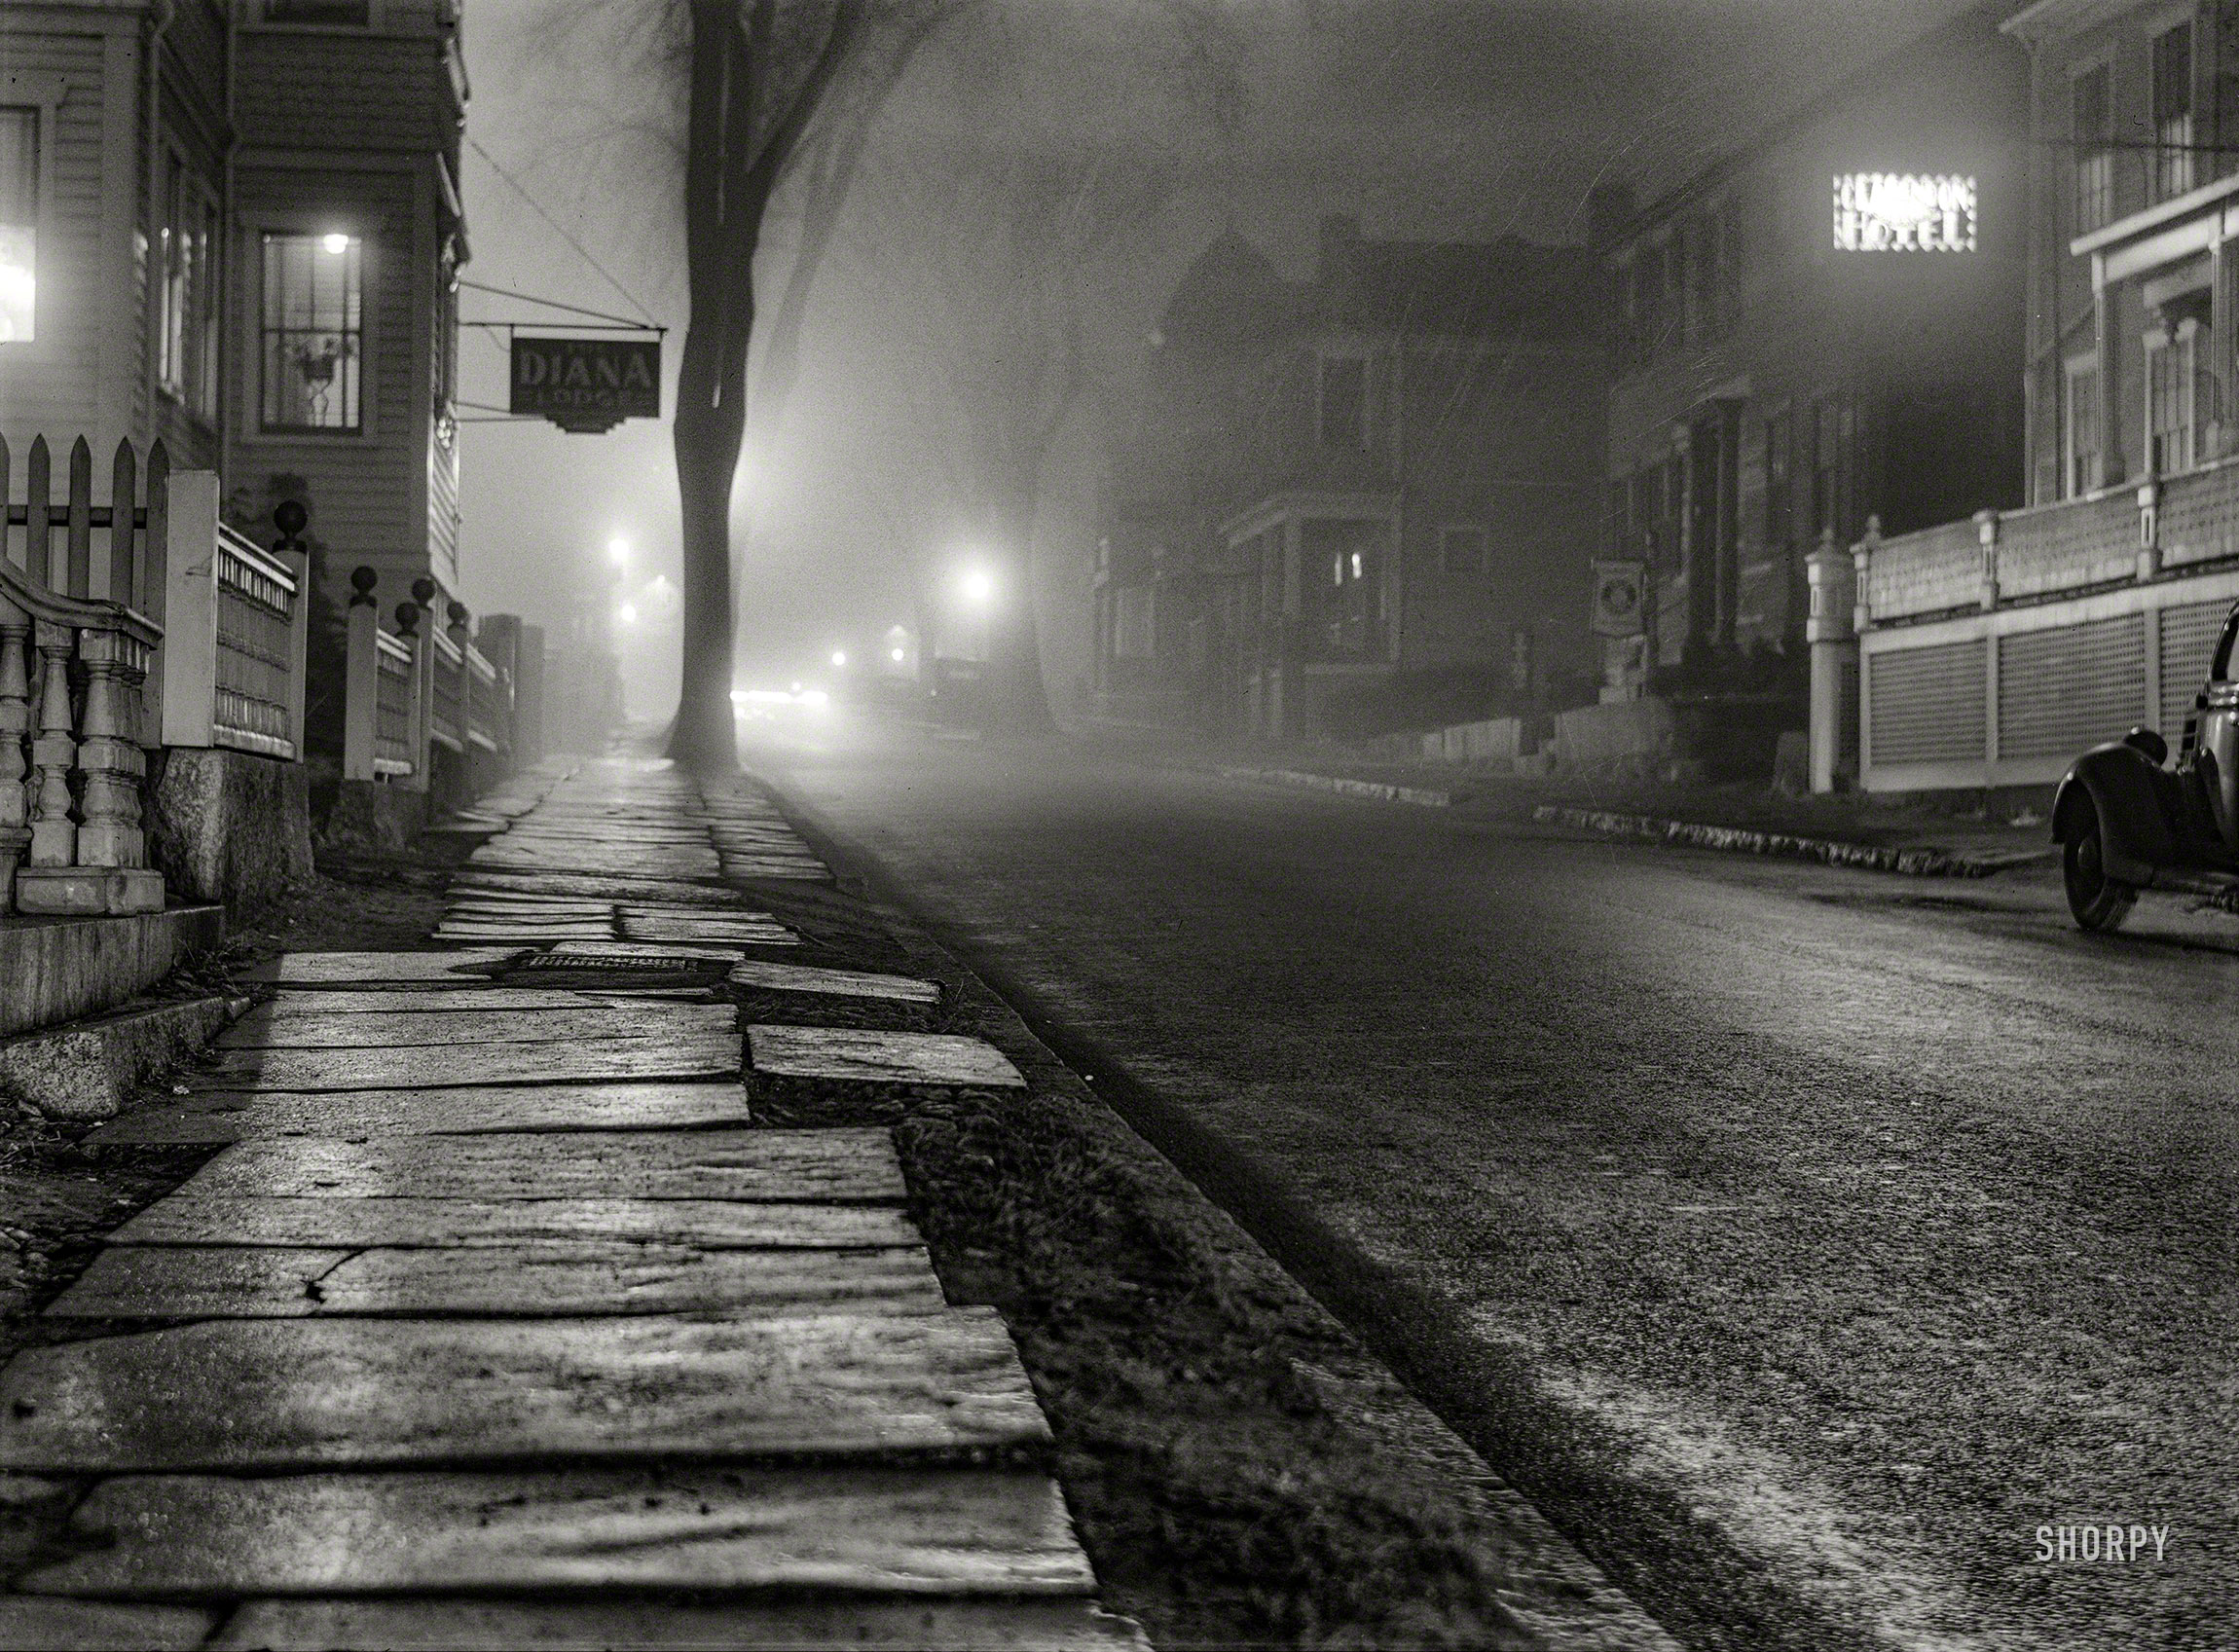 January 1941. "New Bedford, Massachusetts. Street at night during a fog." Acetate negative by Jack Delano for the Farm Security Administration. View full size.